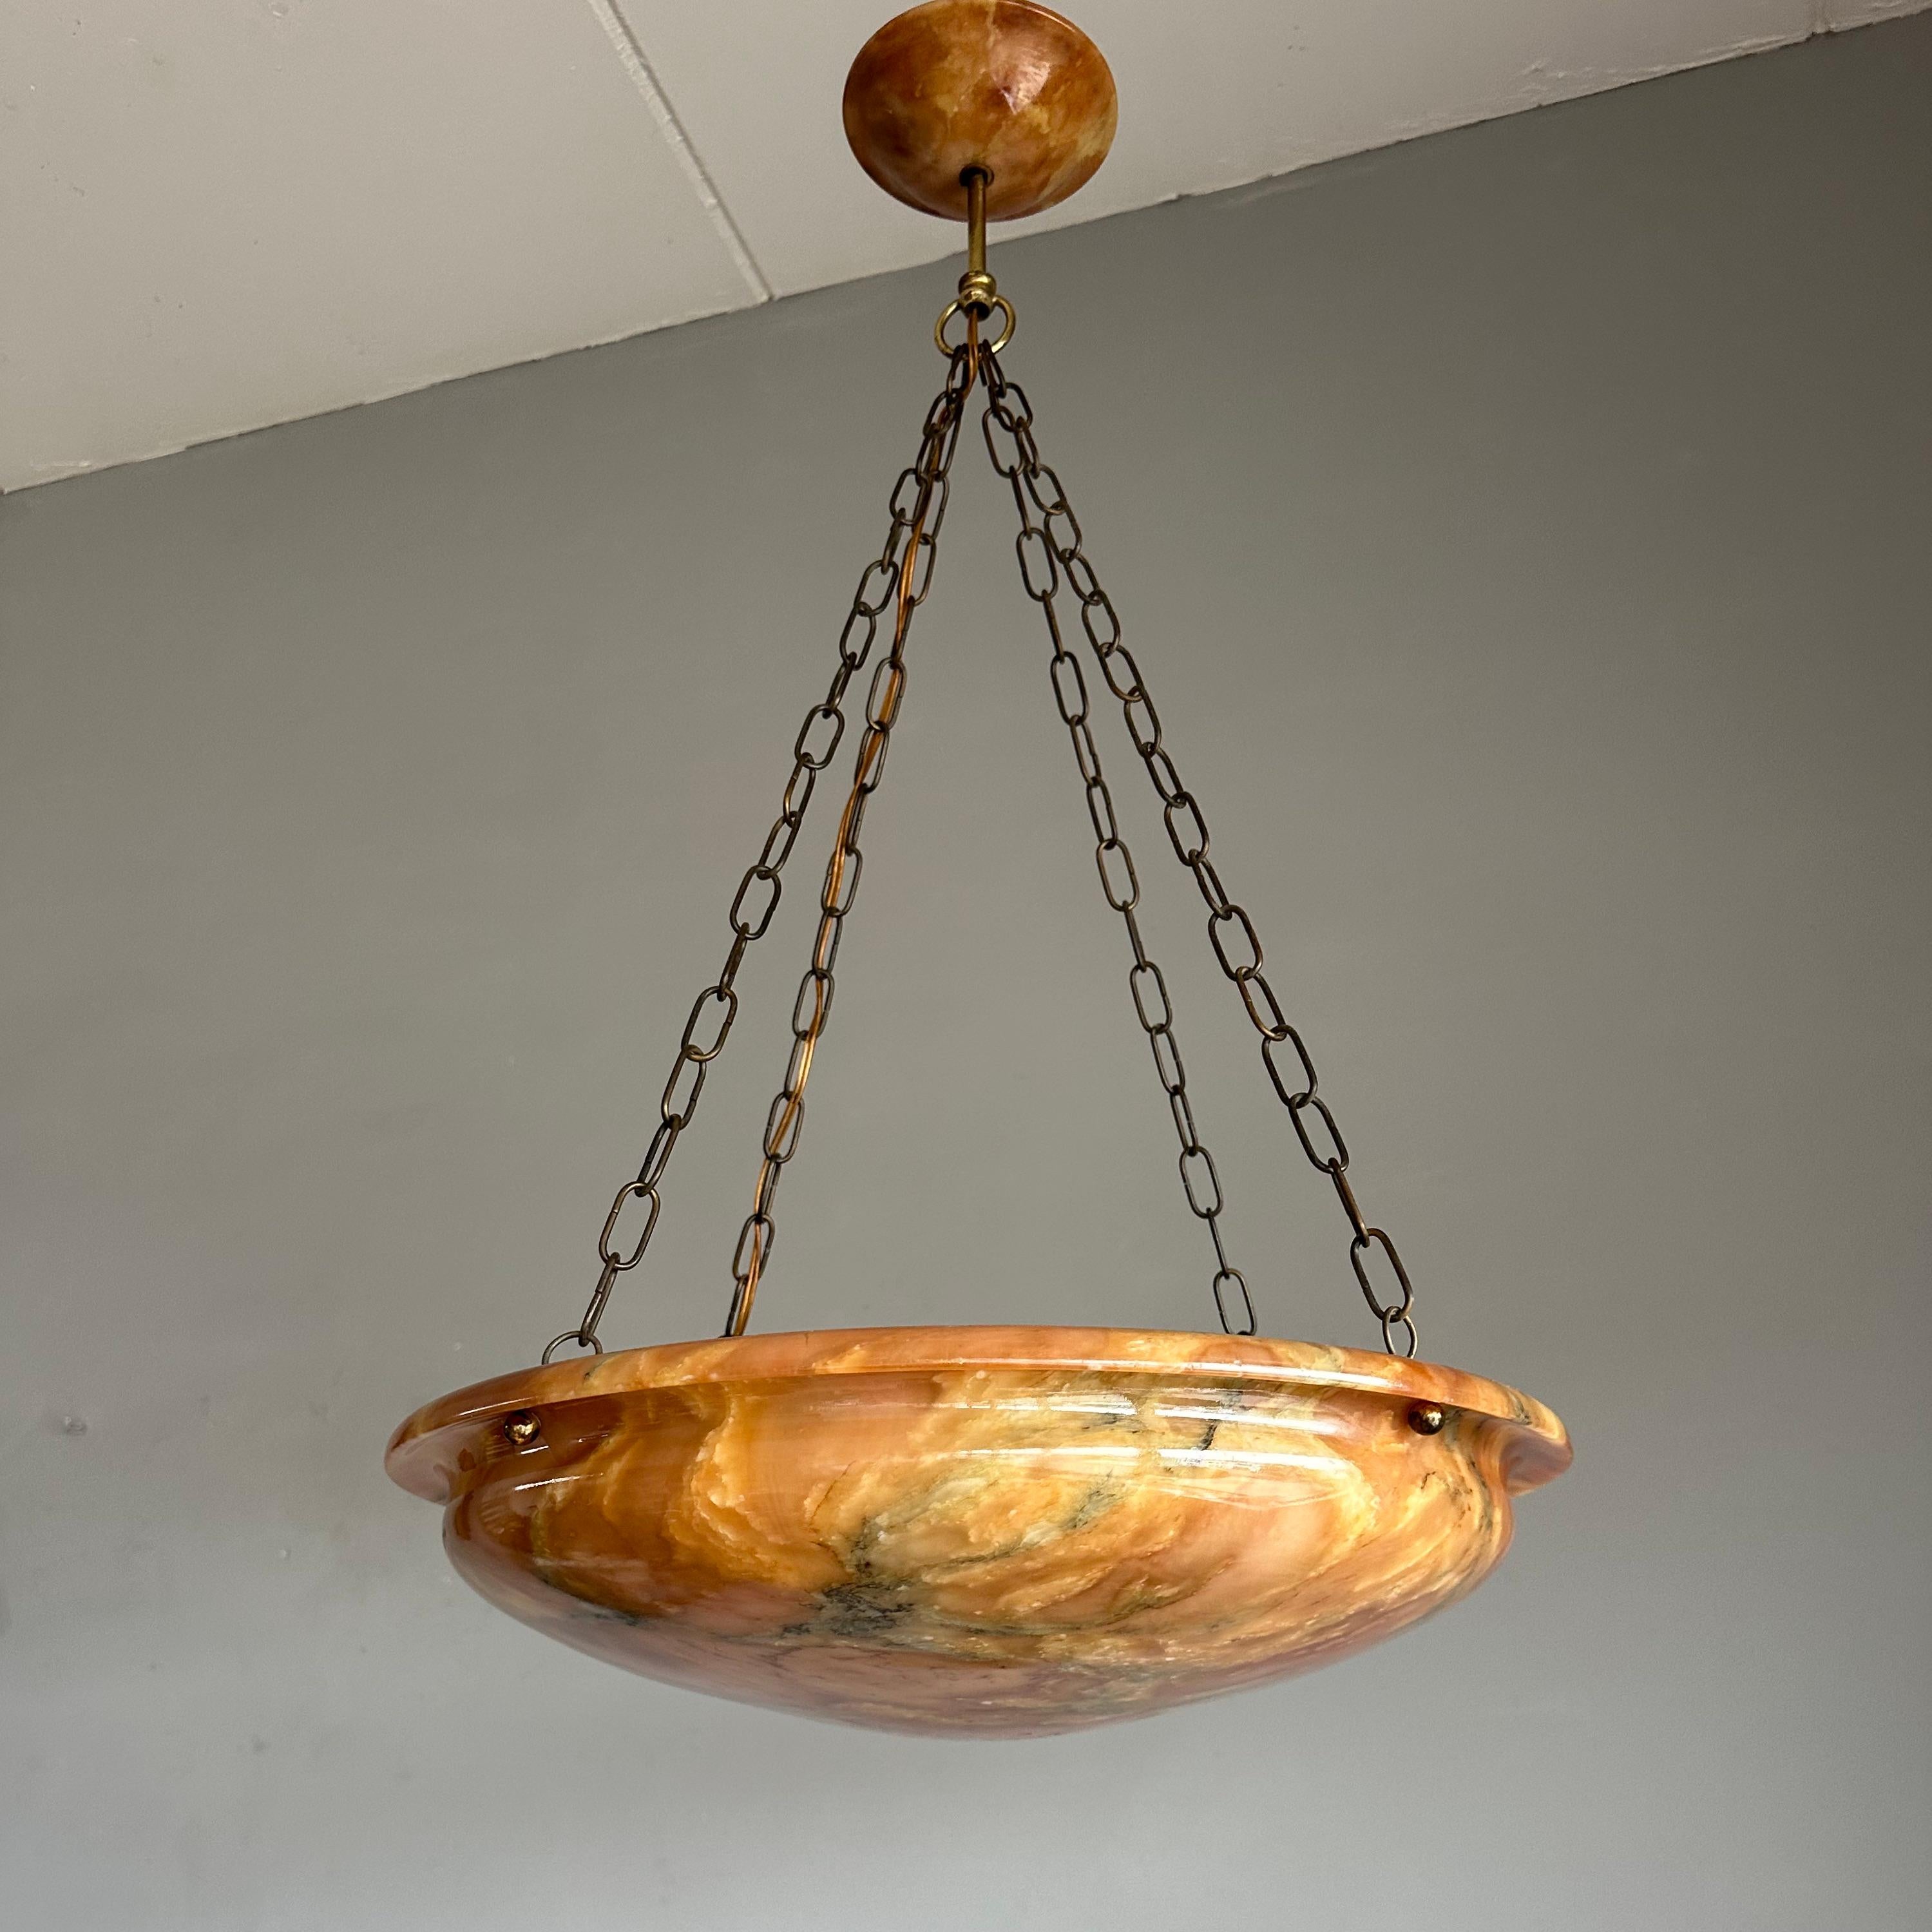 Striking Antique and Mint Condition, Large Alabaster Pendant Light / Fixture For Sale 7